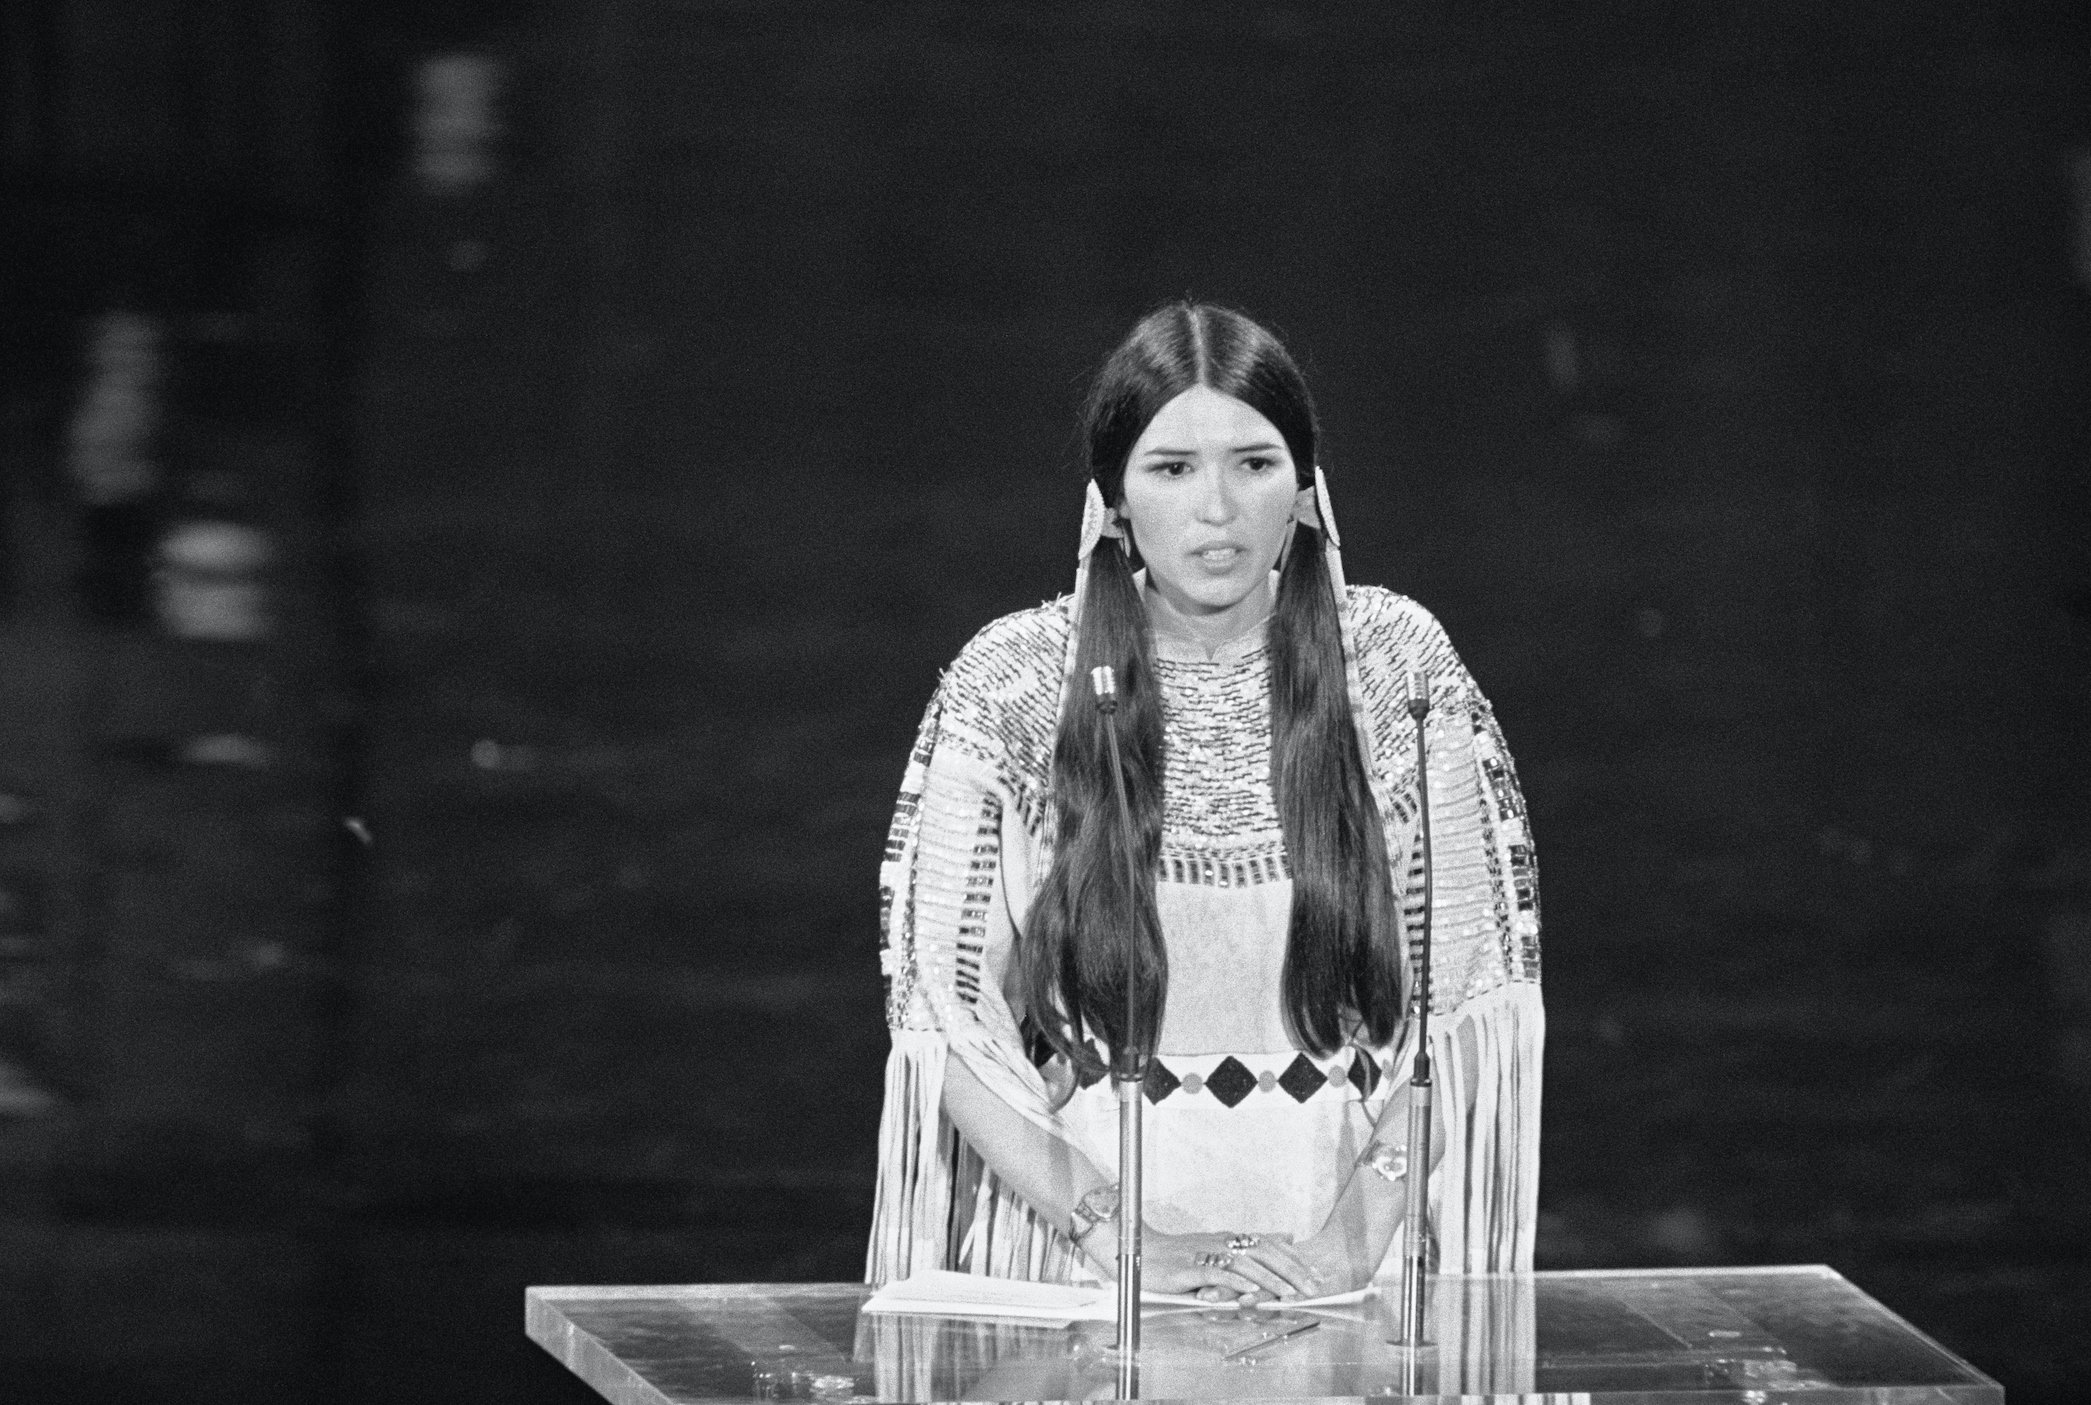 Sacheen Littlefeather refuses the Best Actor award in place of Marlon Brando at the 1973 Academy Awards